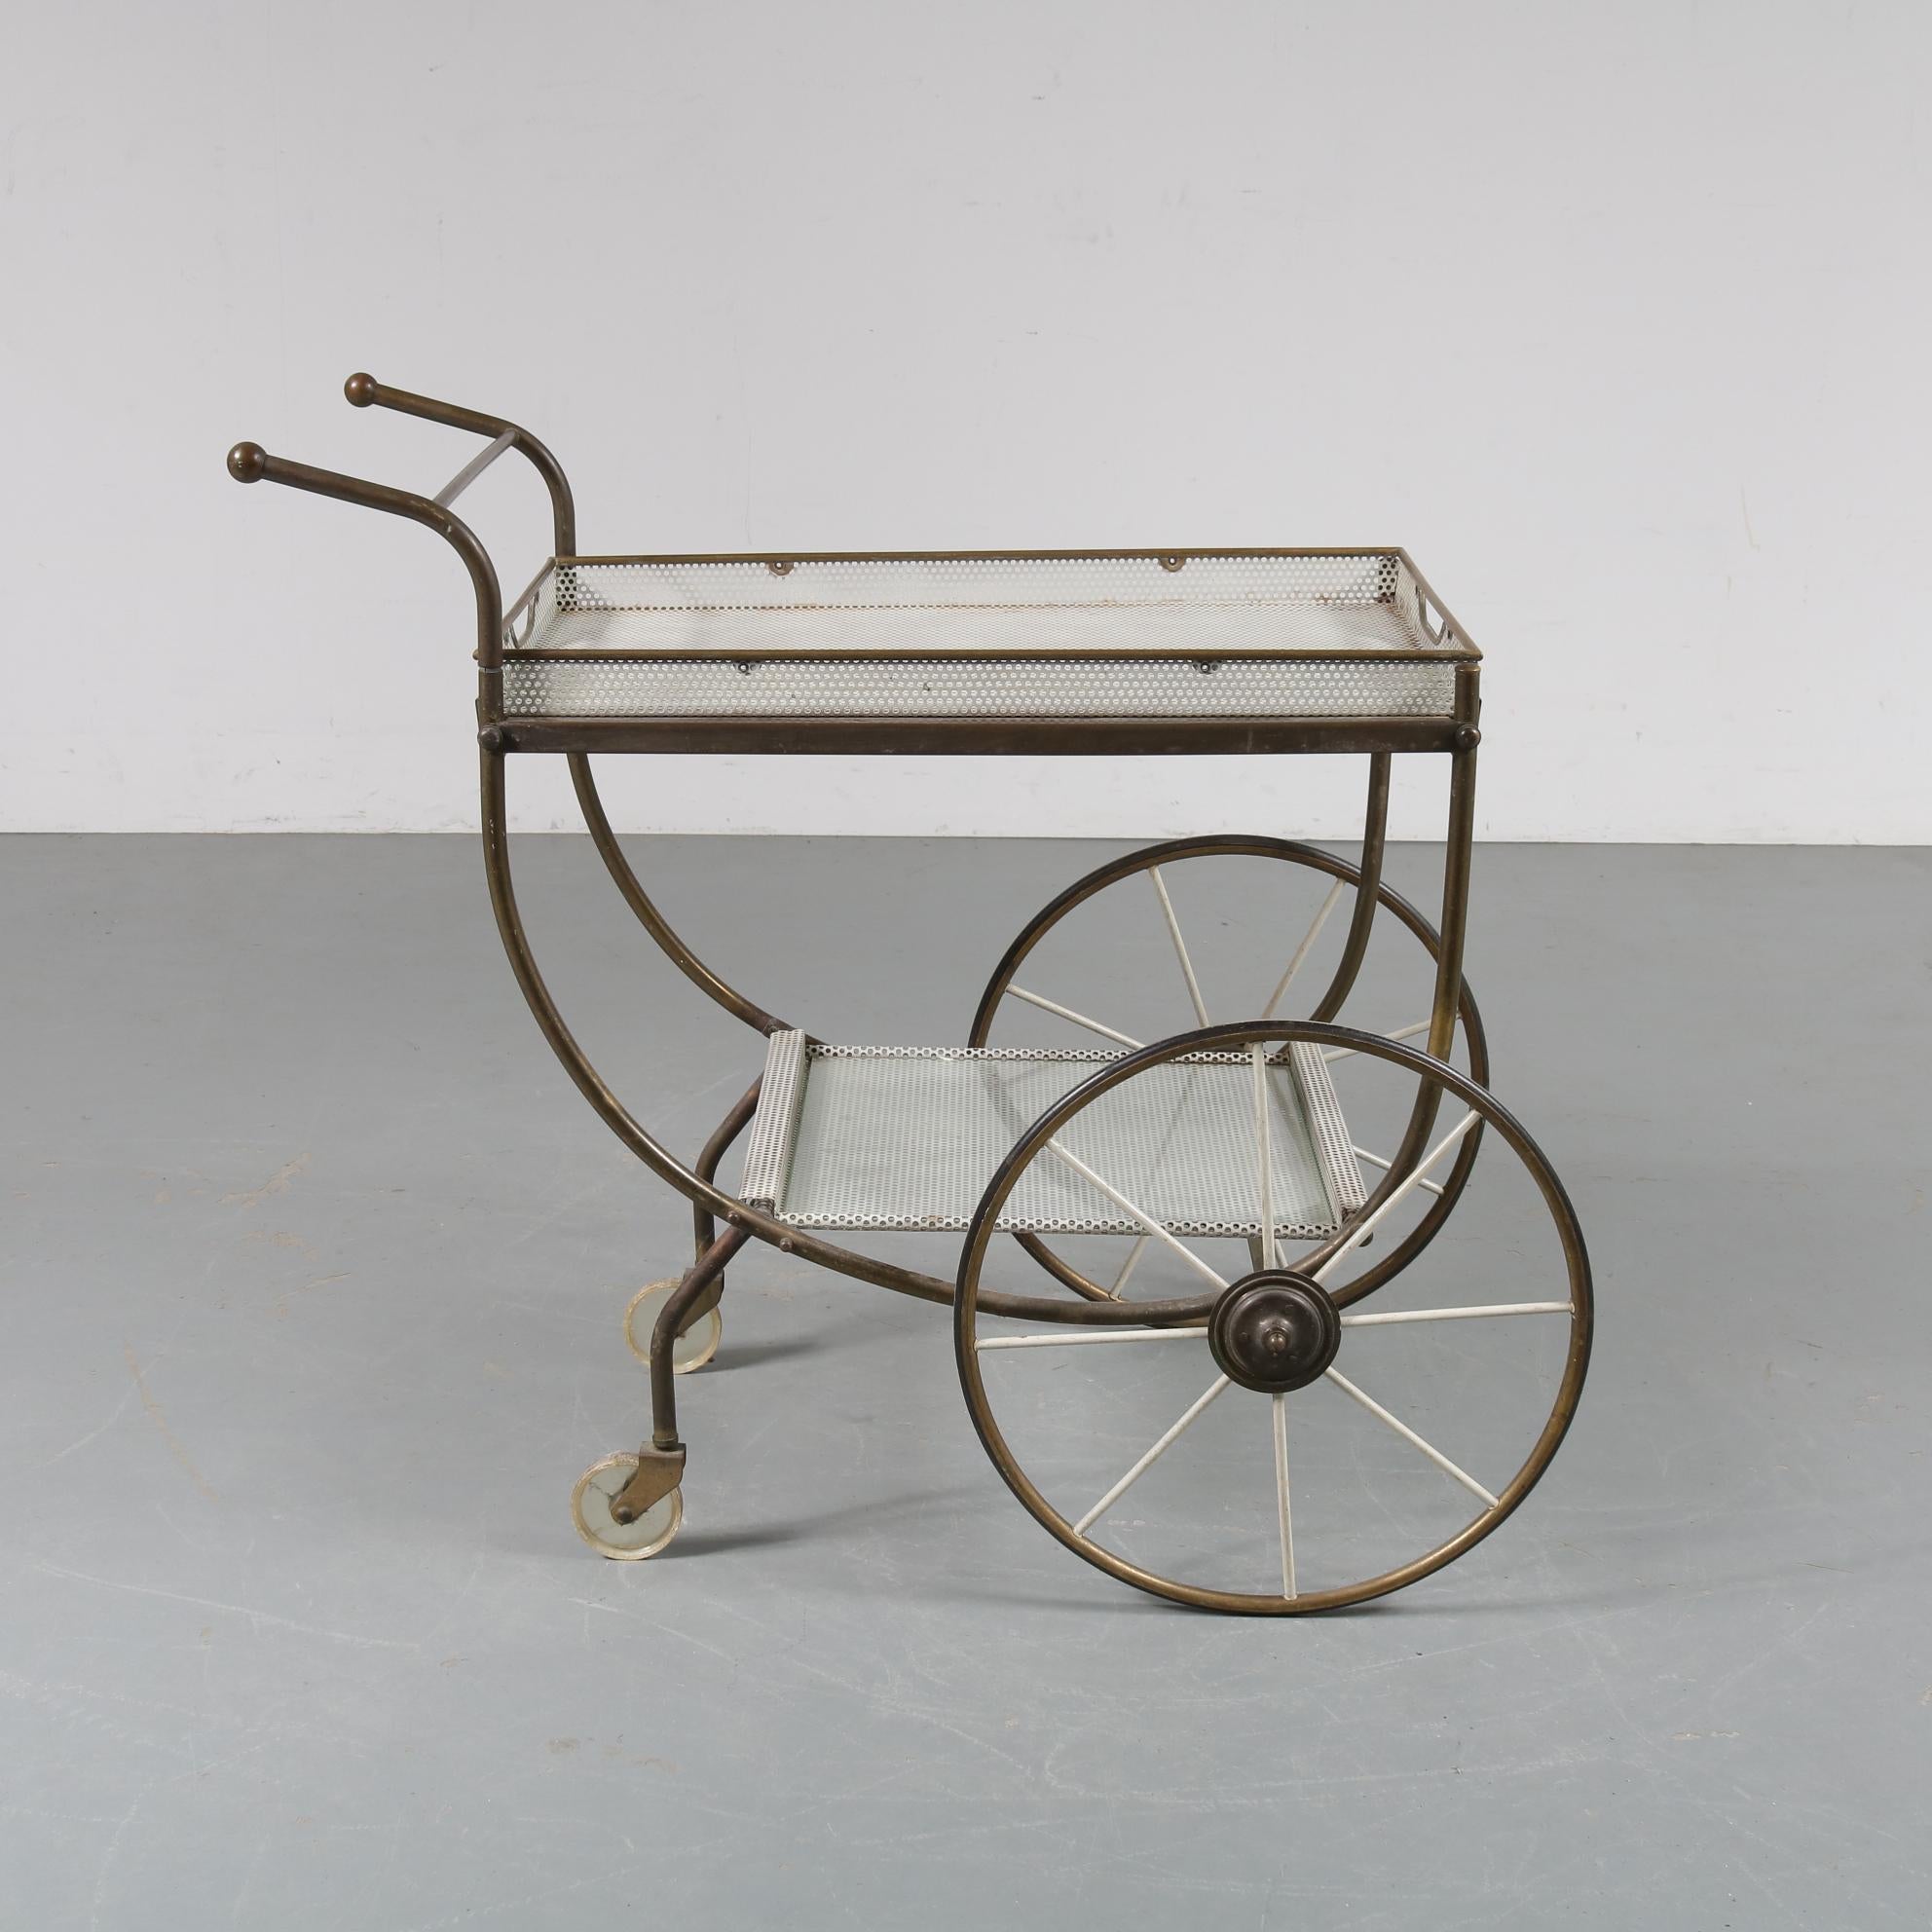 Luxurious tea trolley bar cart, manufactured in Sweden by Svenskt Tenn, circa 1950.

This elegant piece is made of beautiful quality brass, giving it a very classy appearance. It stands out with its amazing details in the design. It has two